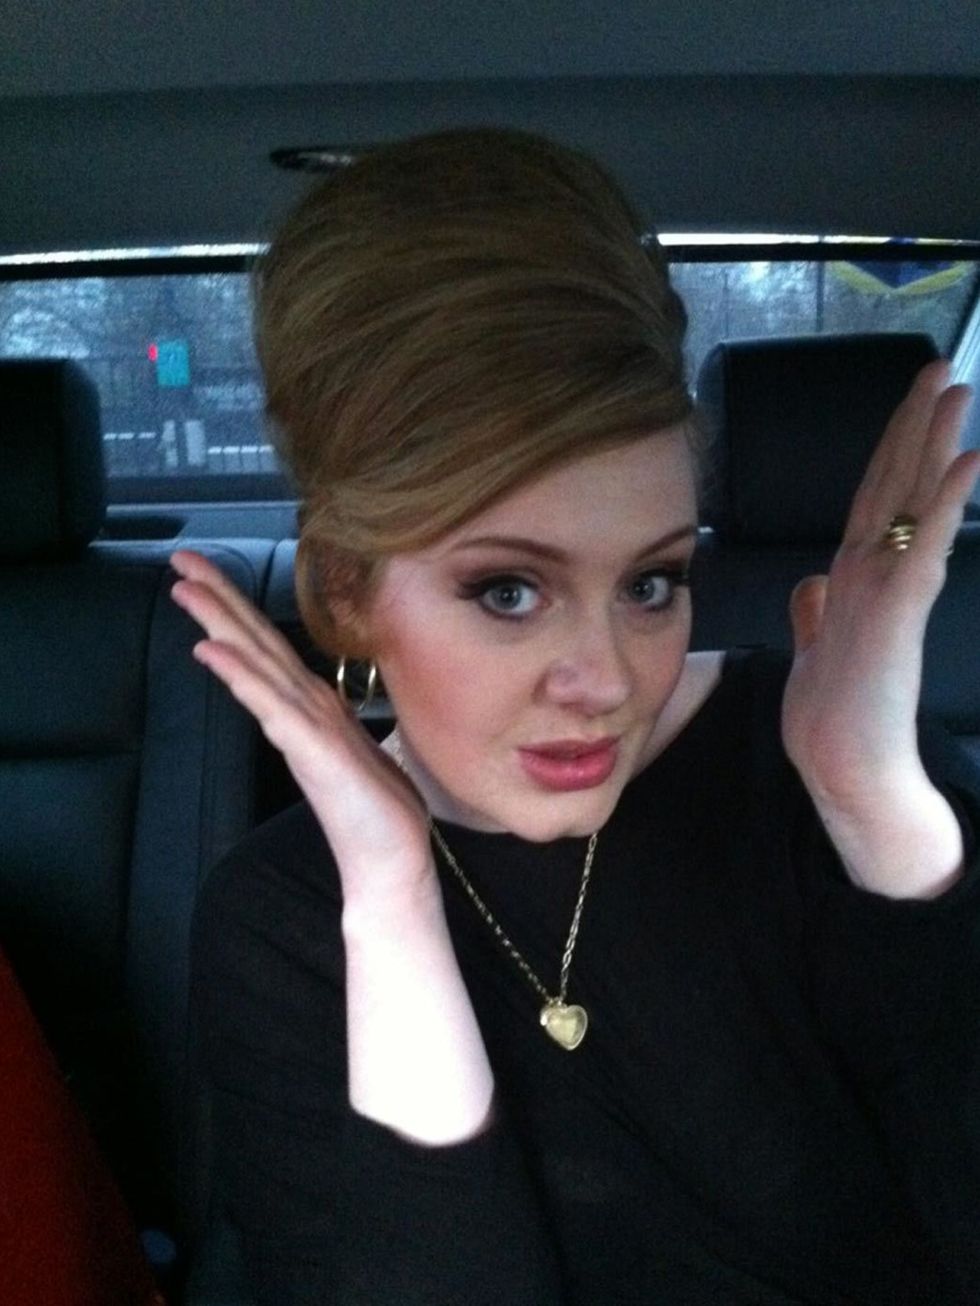 <p><a href="http://www.elleuk.com/star-style/celebrity-style-files/adele"></a> preened and primed to perfection</p><p>Adele <a href="https://twitter.com/"></a> Back on the grind. Hair and make up did. Merry Christmas! Axx</p>